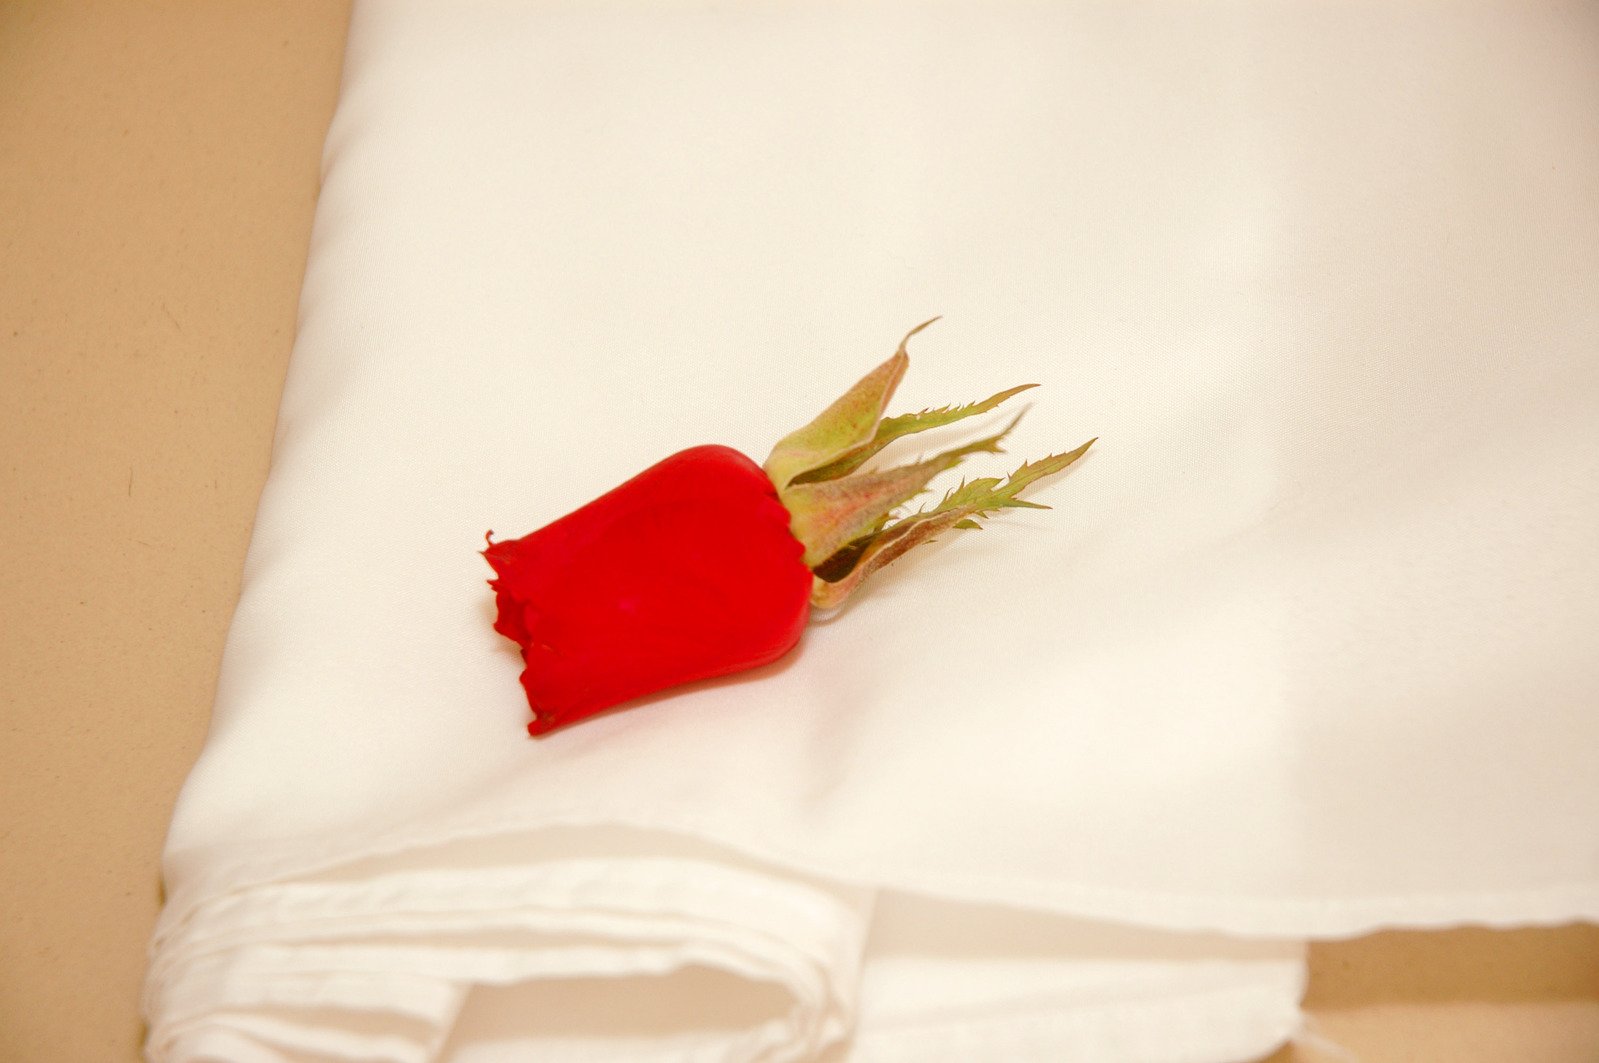 a single rose is pinned to a napkin